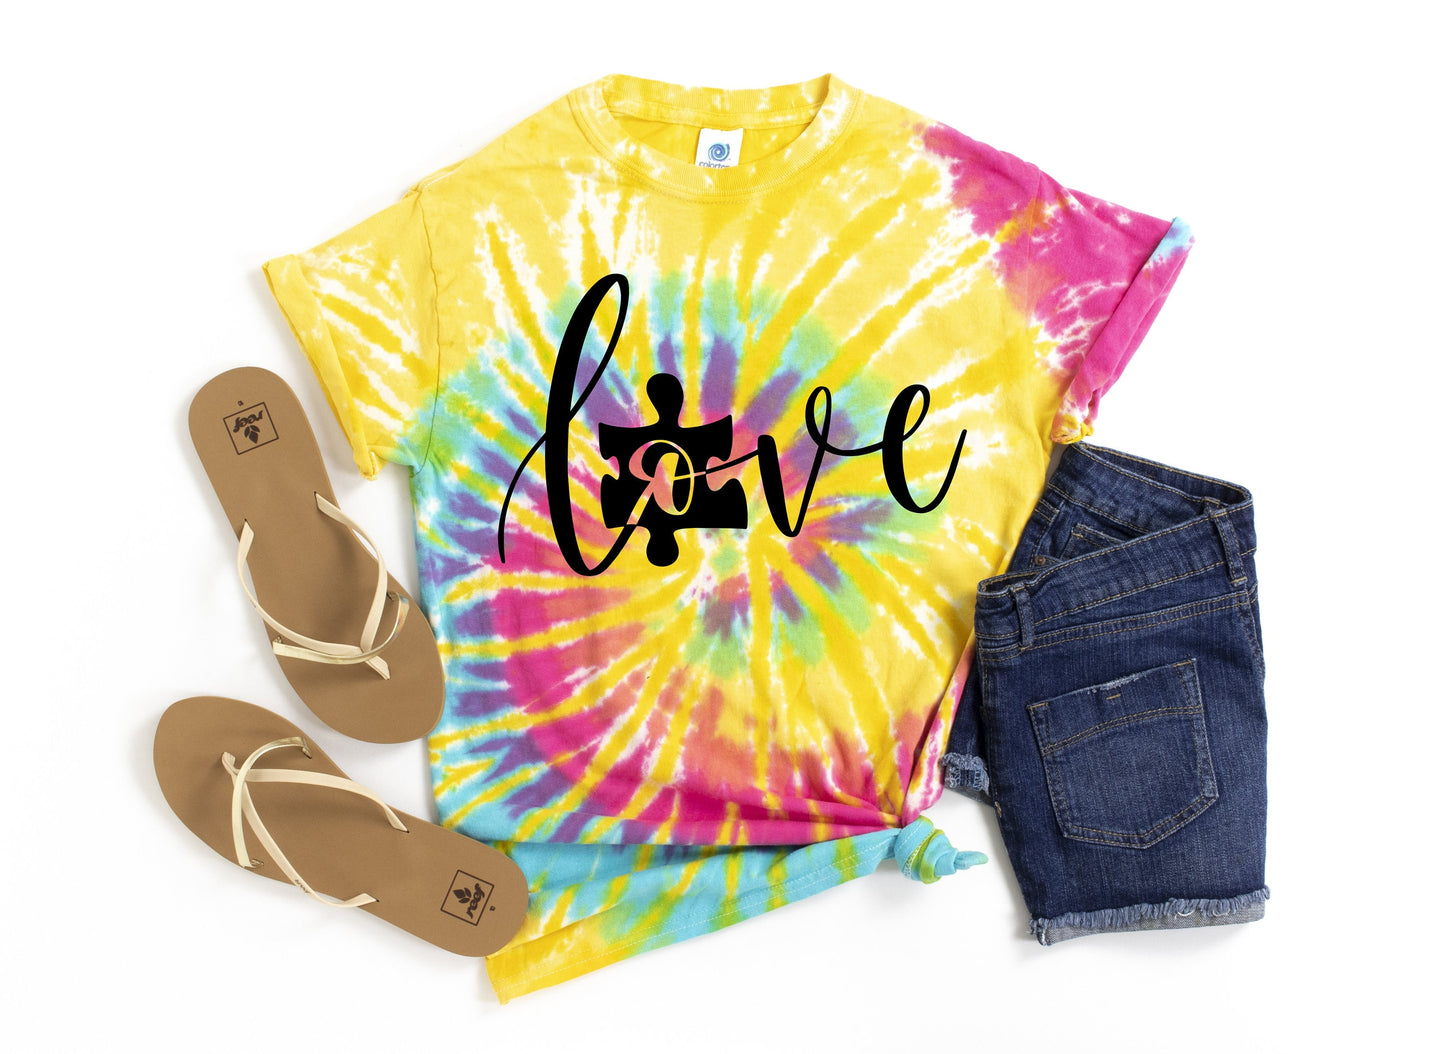 Autism Love Tie Dye unisex t-shirt - Kids and Adults Sizes - Autism Awareness Shirt - Autism Support - Autism Shirt - Autism Mom Shirt